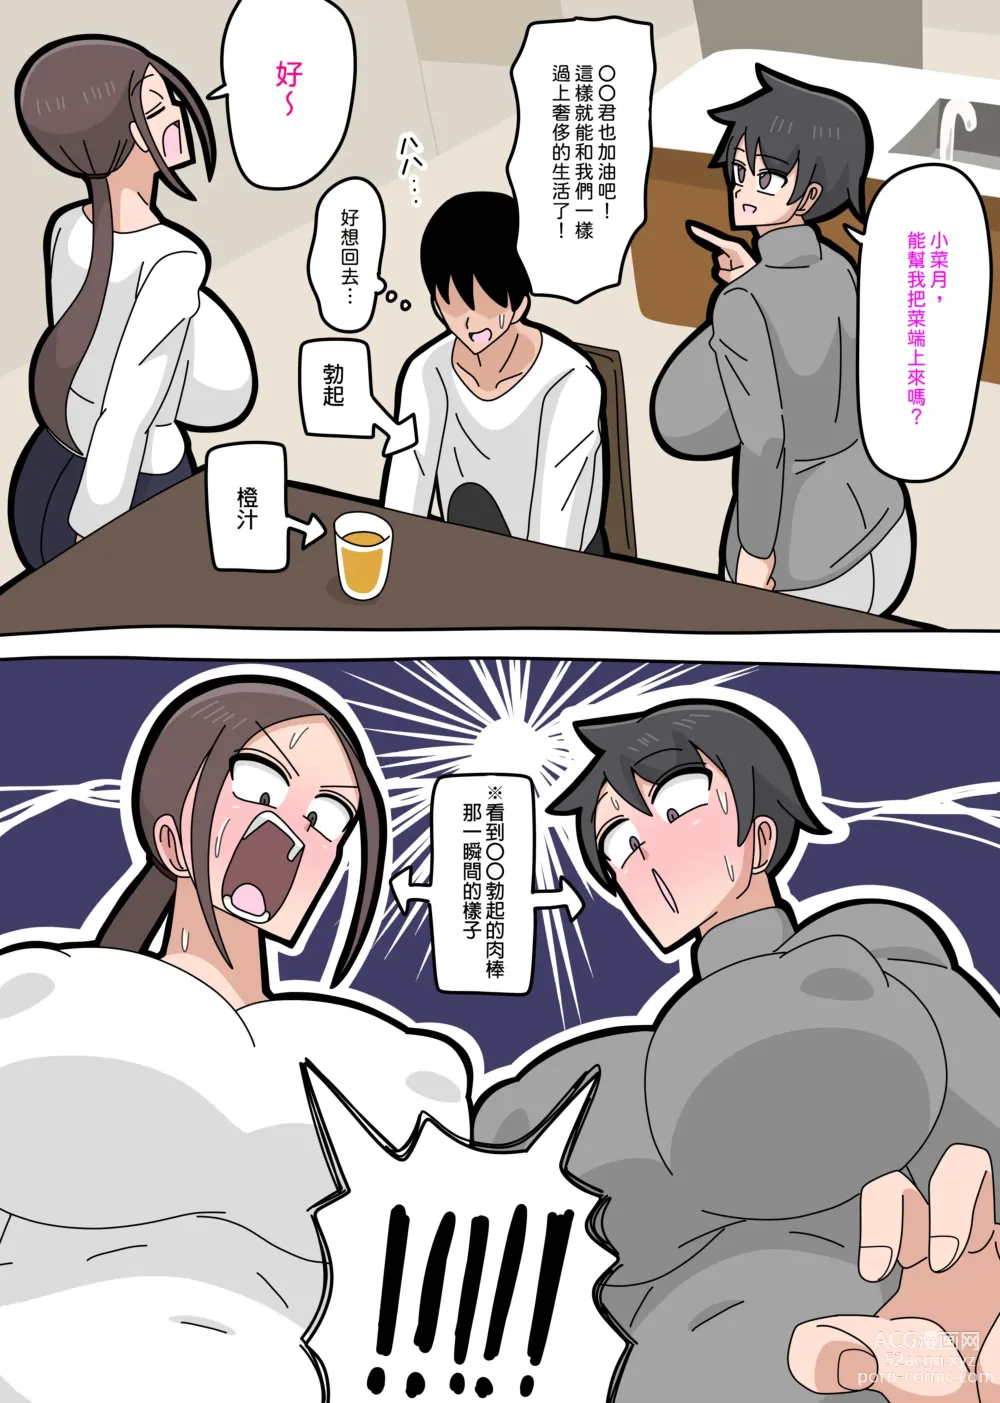 Page 6 of doujinshi 強勢人妻